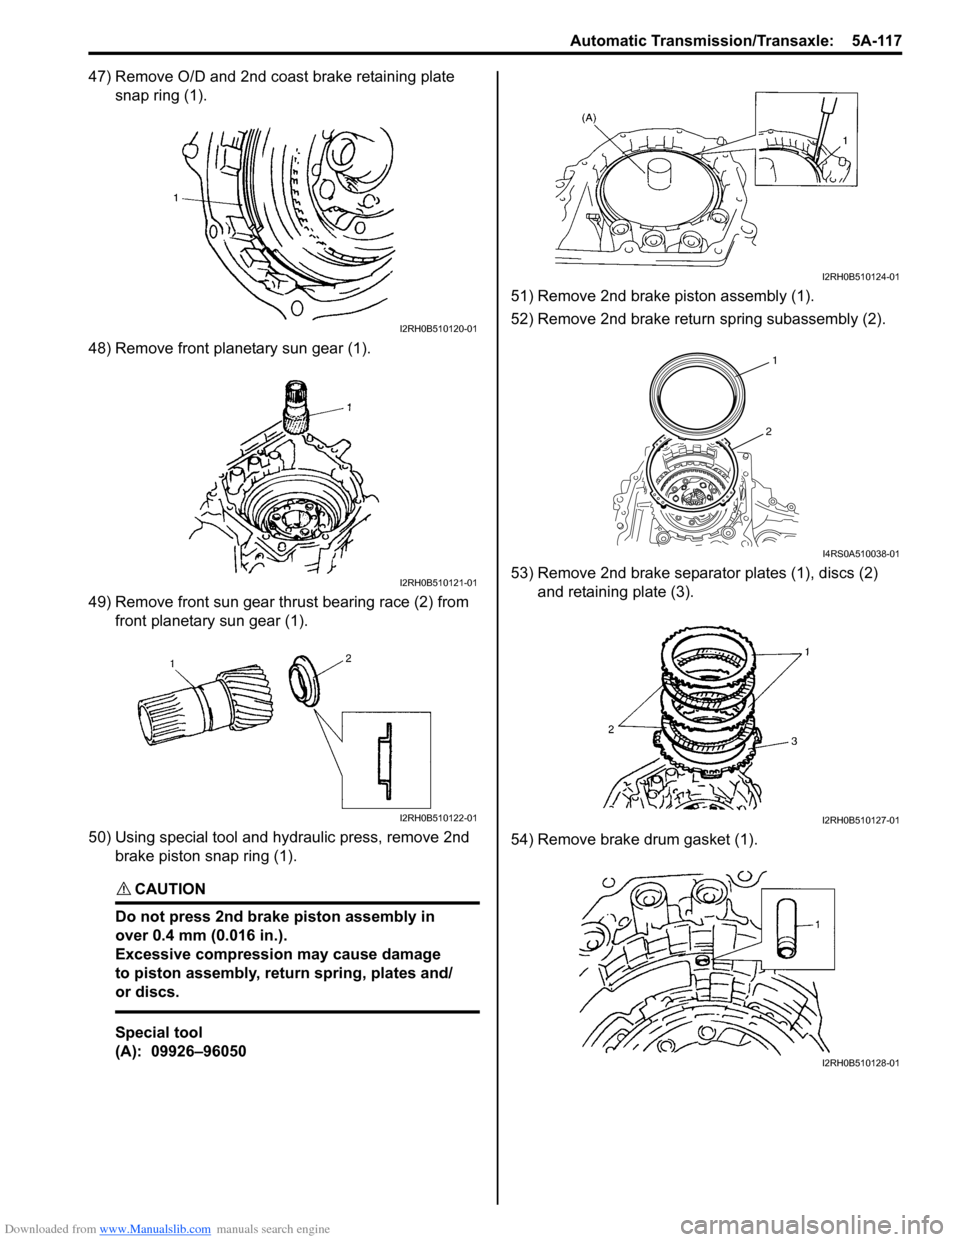 SUZUKI SWIFT 2006 2.G Service Service Manual Downloaded from www.Manualslib.com manuals search engine Automatic Transmission/Transaxle:  5A-117
47) Remove O/D and 2nd coast brake retaining plate snap ring (1).
48) Remove front planetary sun gear